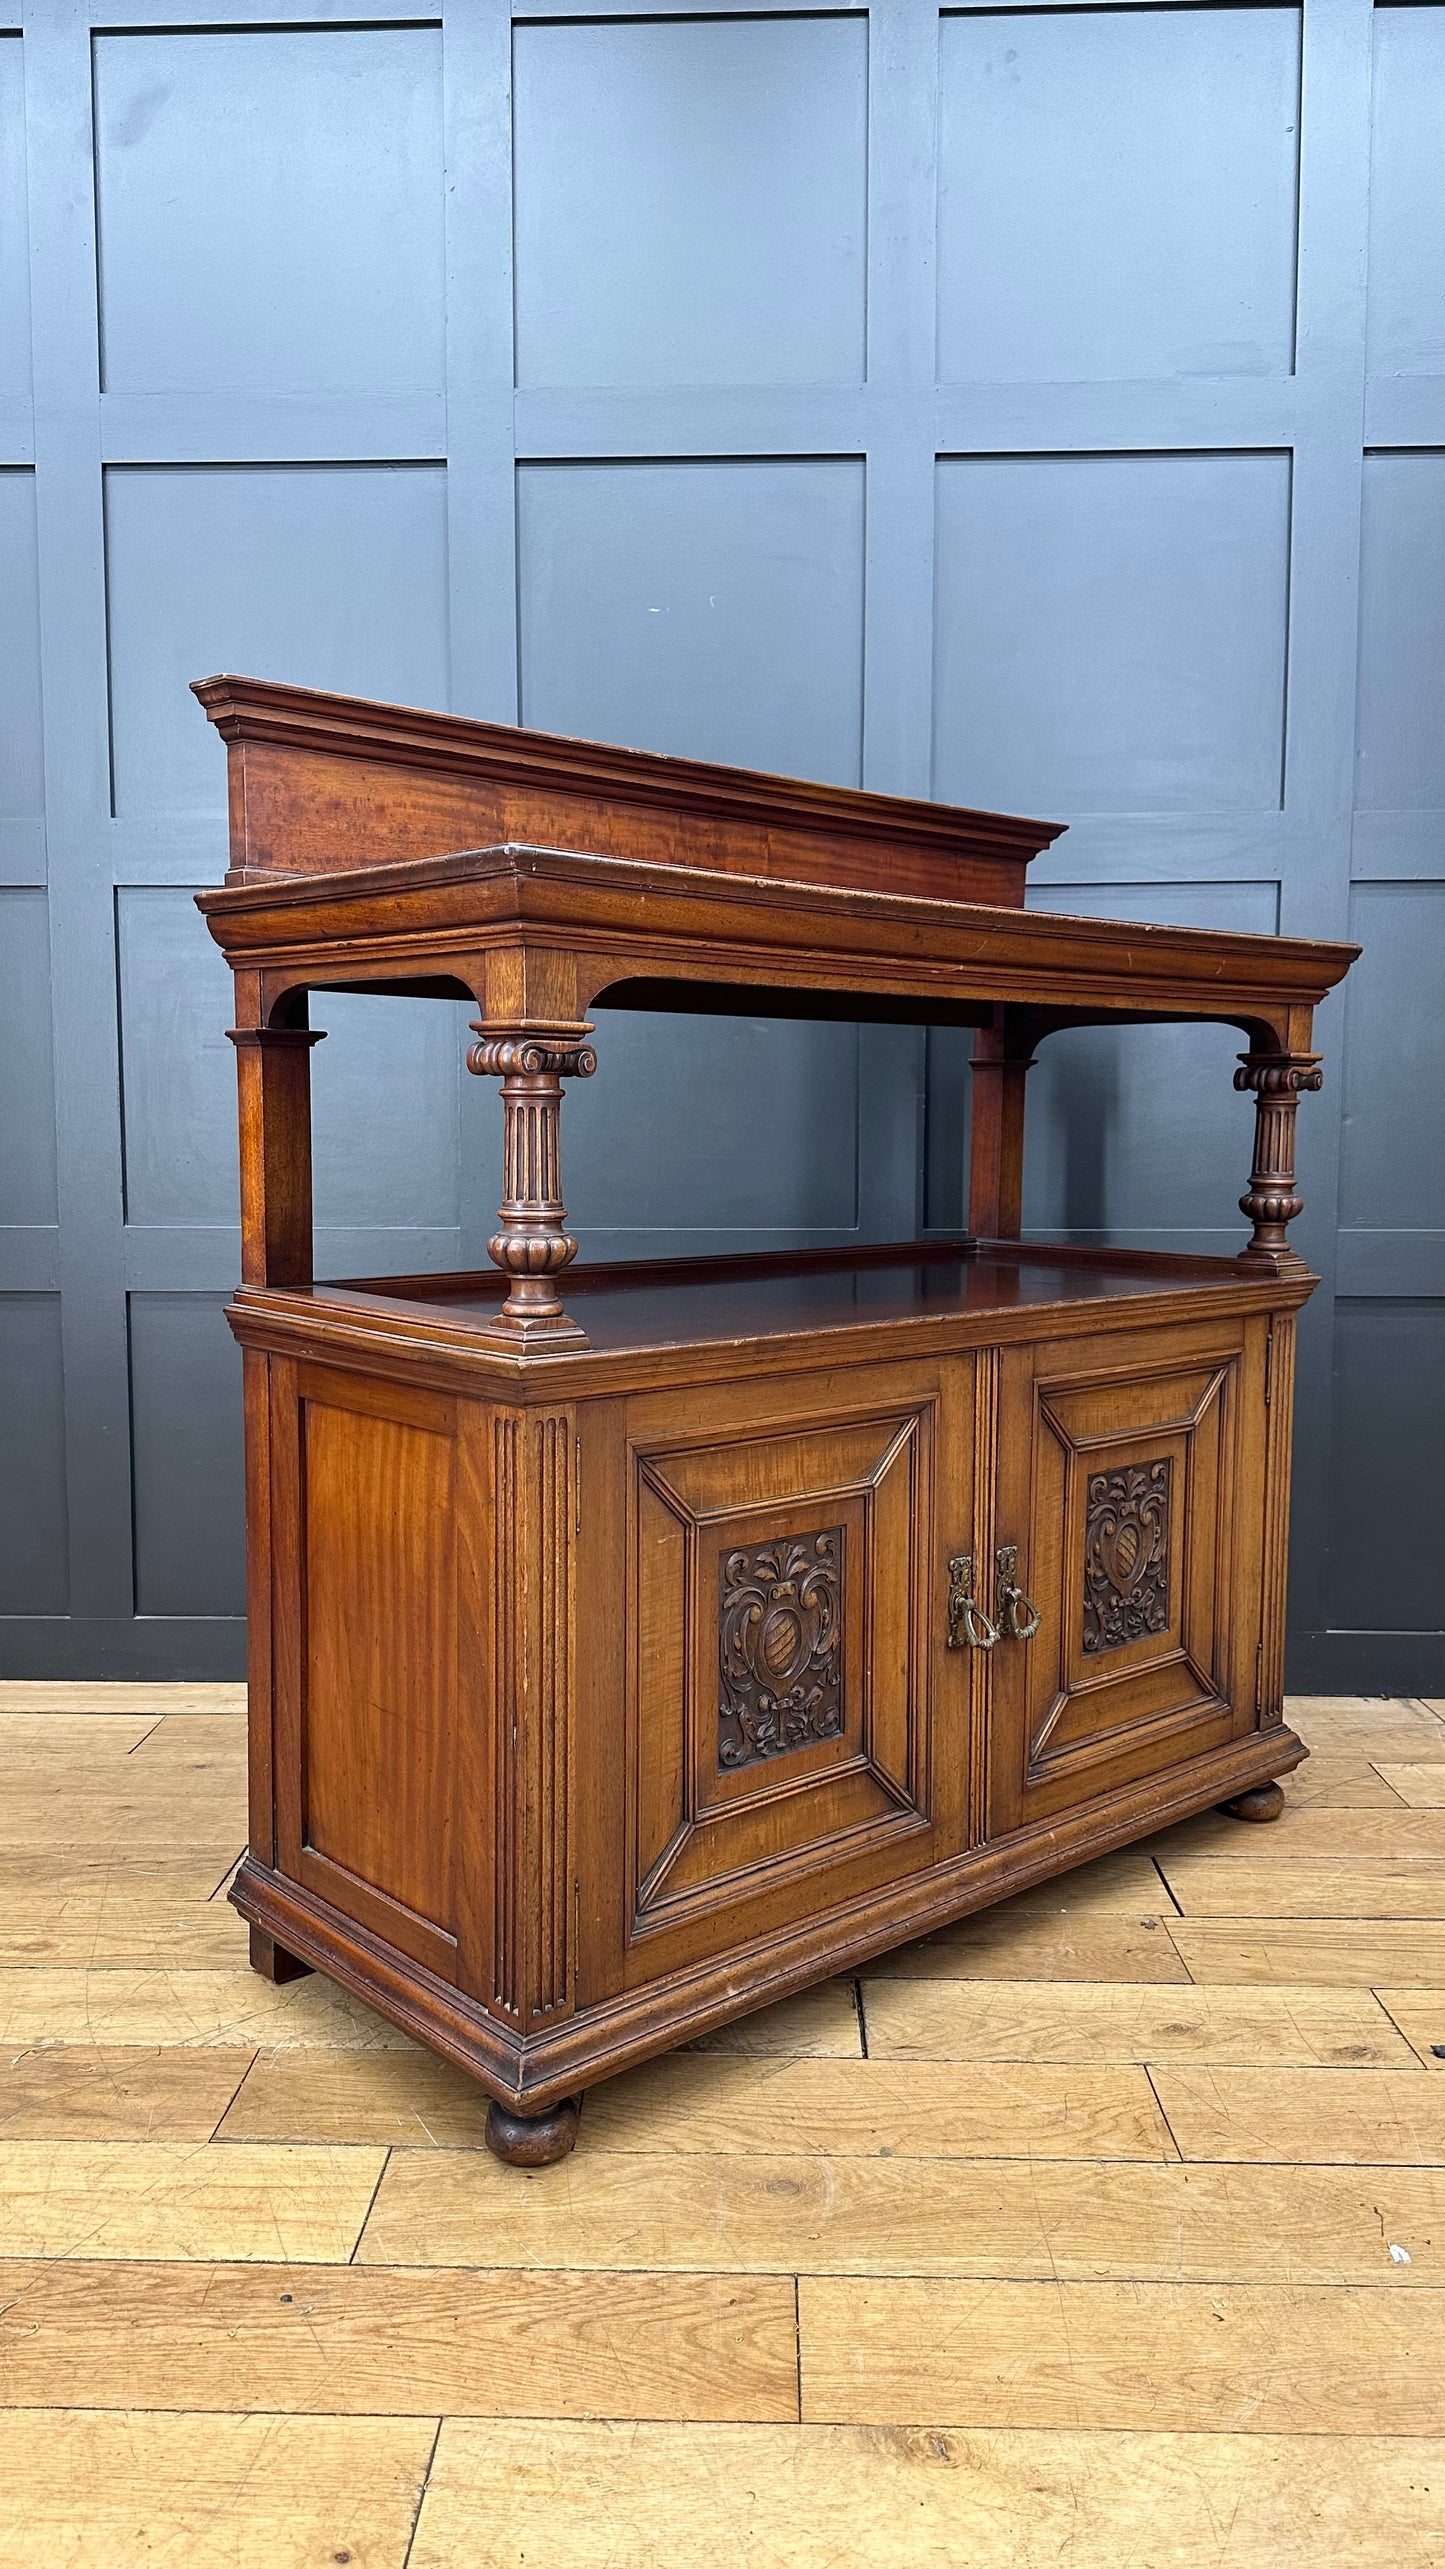 Antique Mahogany Sideboard / Cocktail Cabinet / Buffet Server / Two Tier